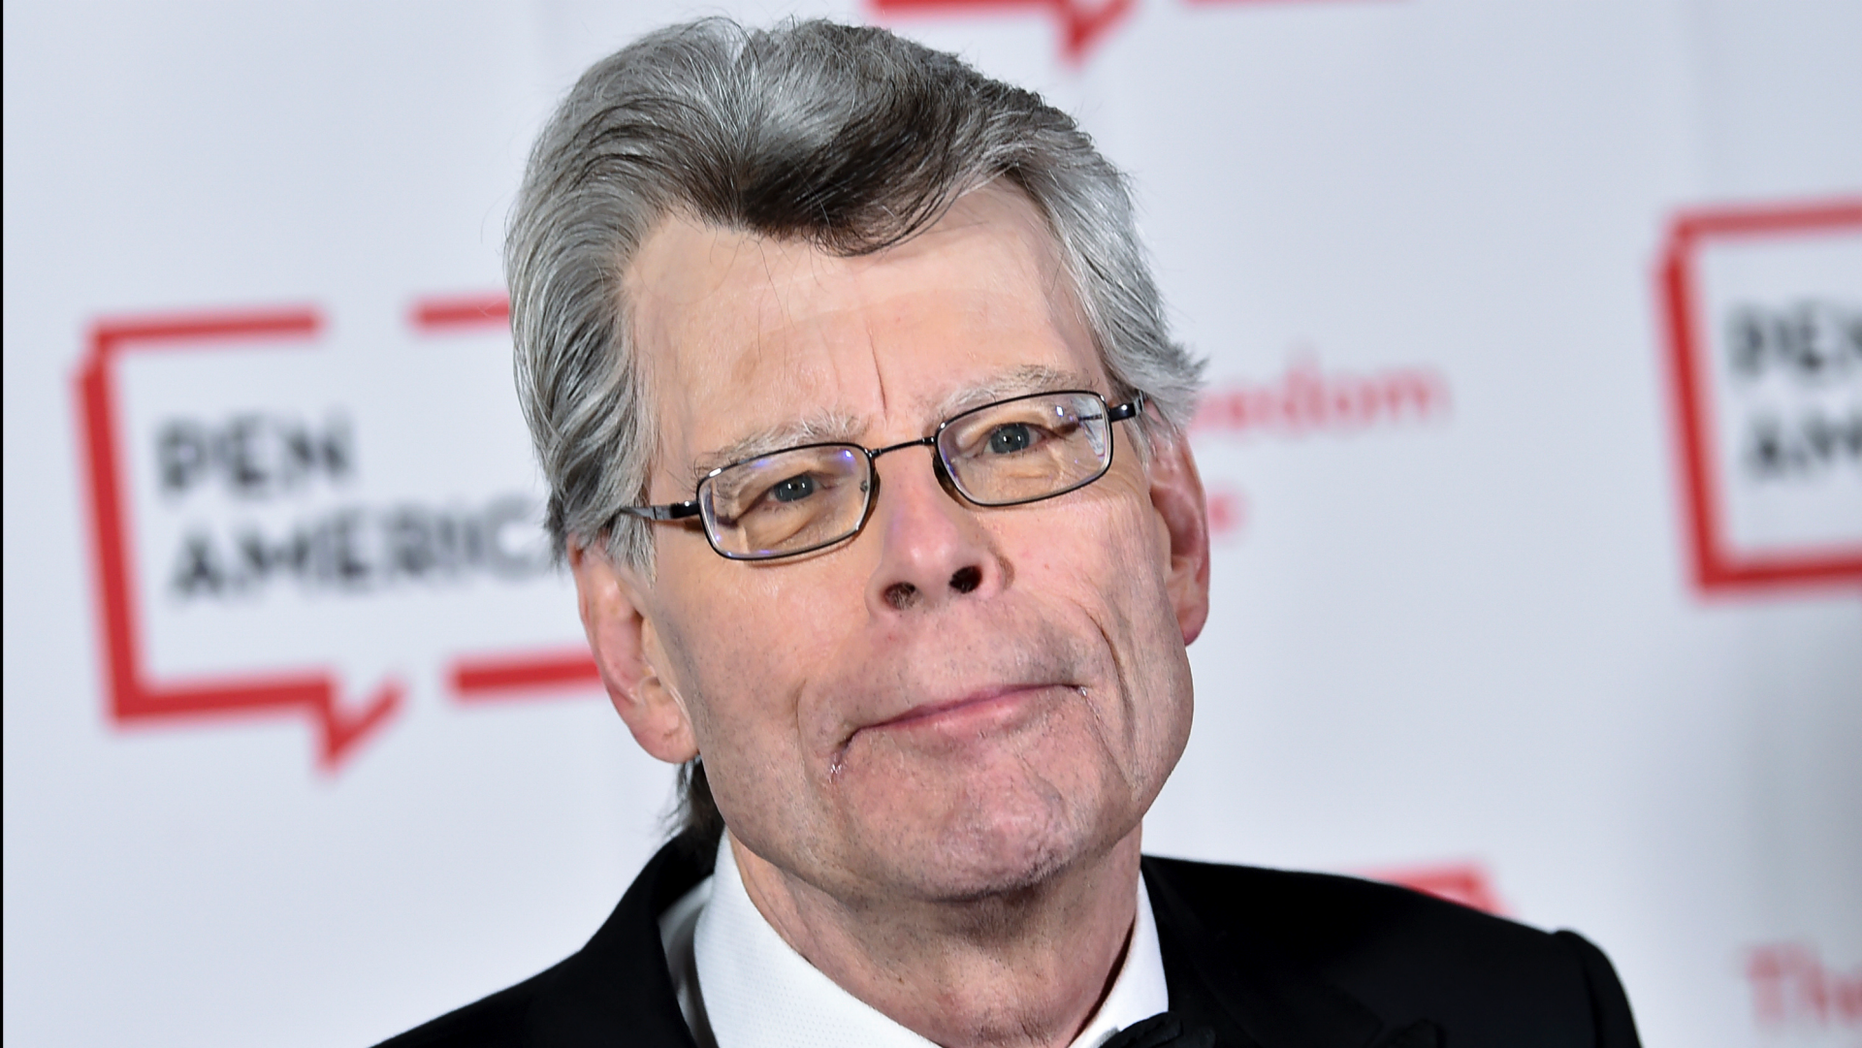 FEATURE - On May 22, 2018, Stephen King, recipient of the PEN Literary Service Award, attends the 2018 PEN Literary Gala at the American Museum of Natural History in New York. The master of the American horror novel and his wife Tabitha have donated more than a million dollars to the New England Historic Genealogical Society based in Boston. The country's oldest and largest genealogy society announced Tuesday, February 26, 2019 that it will use this gift to develop educational programming that presents family and local history to a wider audience and the community. 39, helps to enlarge the headquarters of the organization. (Photo by Evan Agostini / Invision / AP, File)